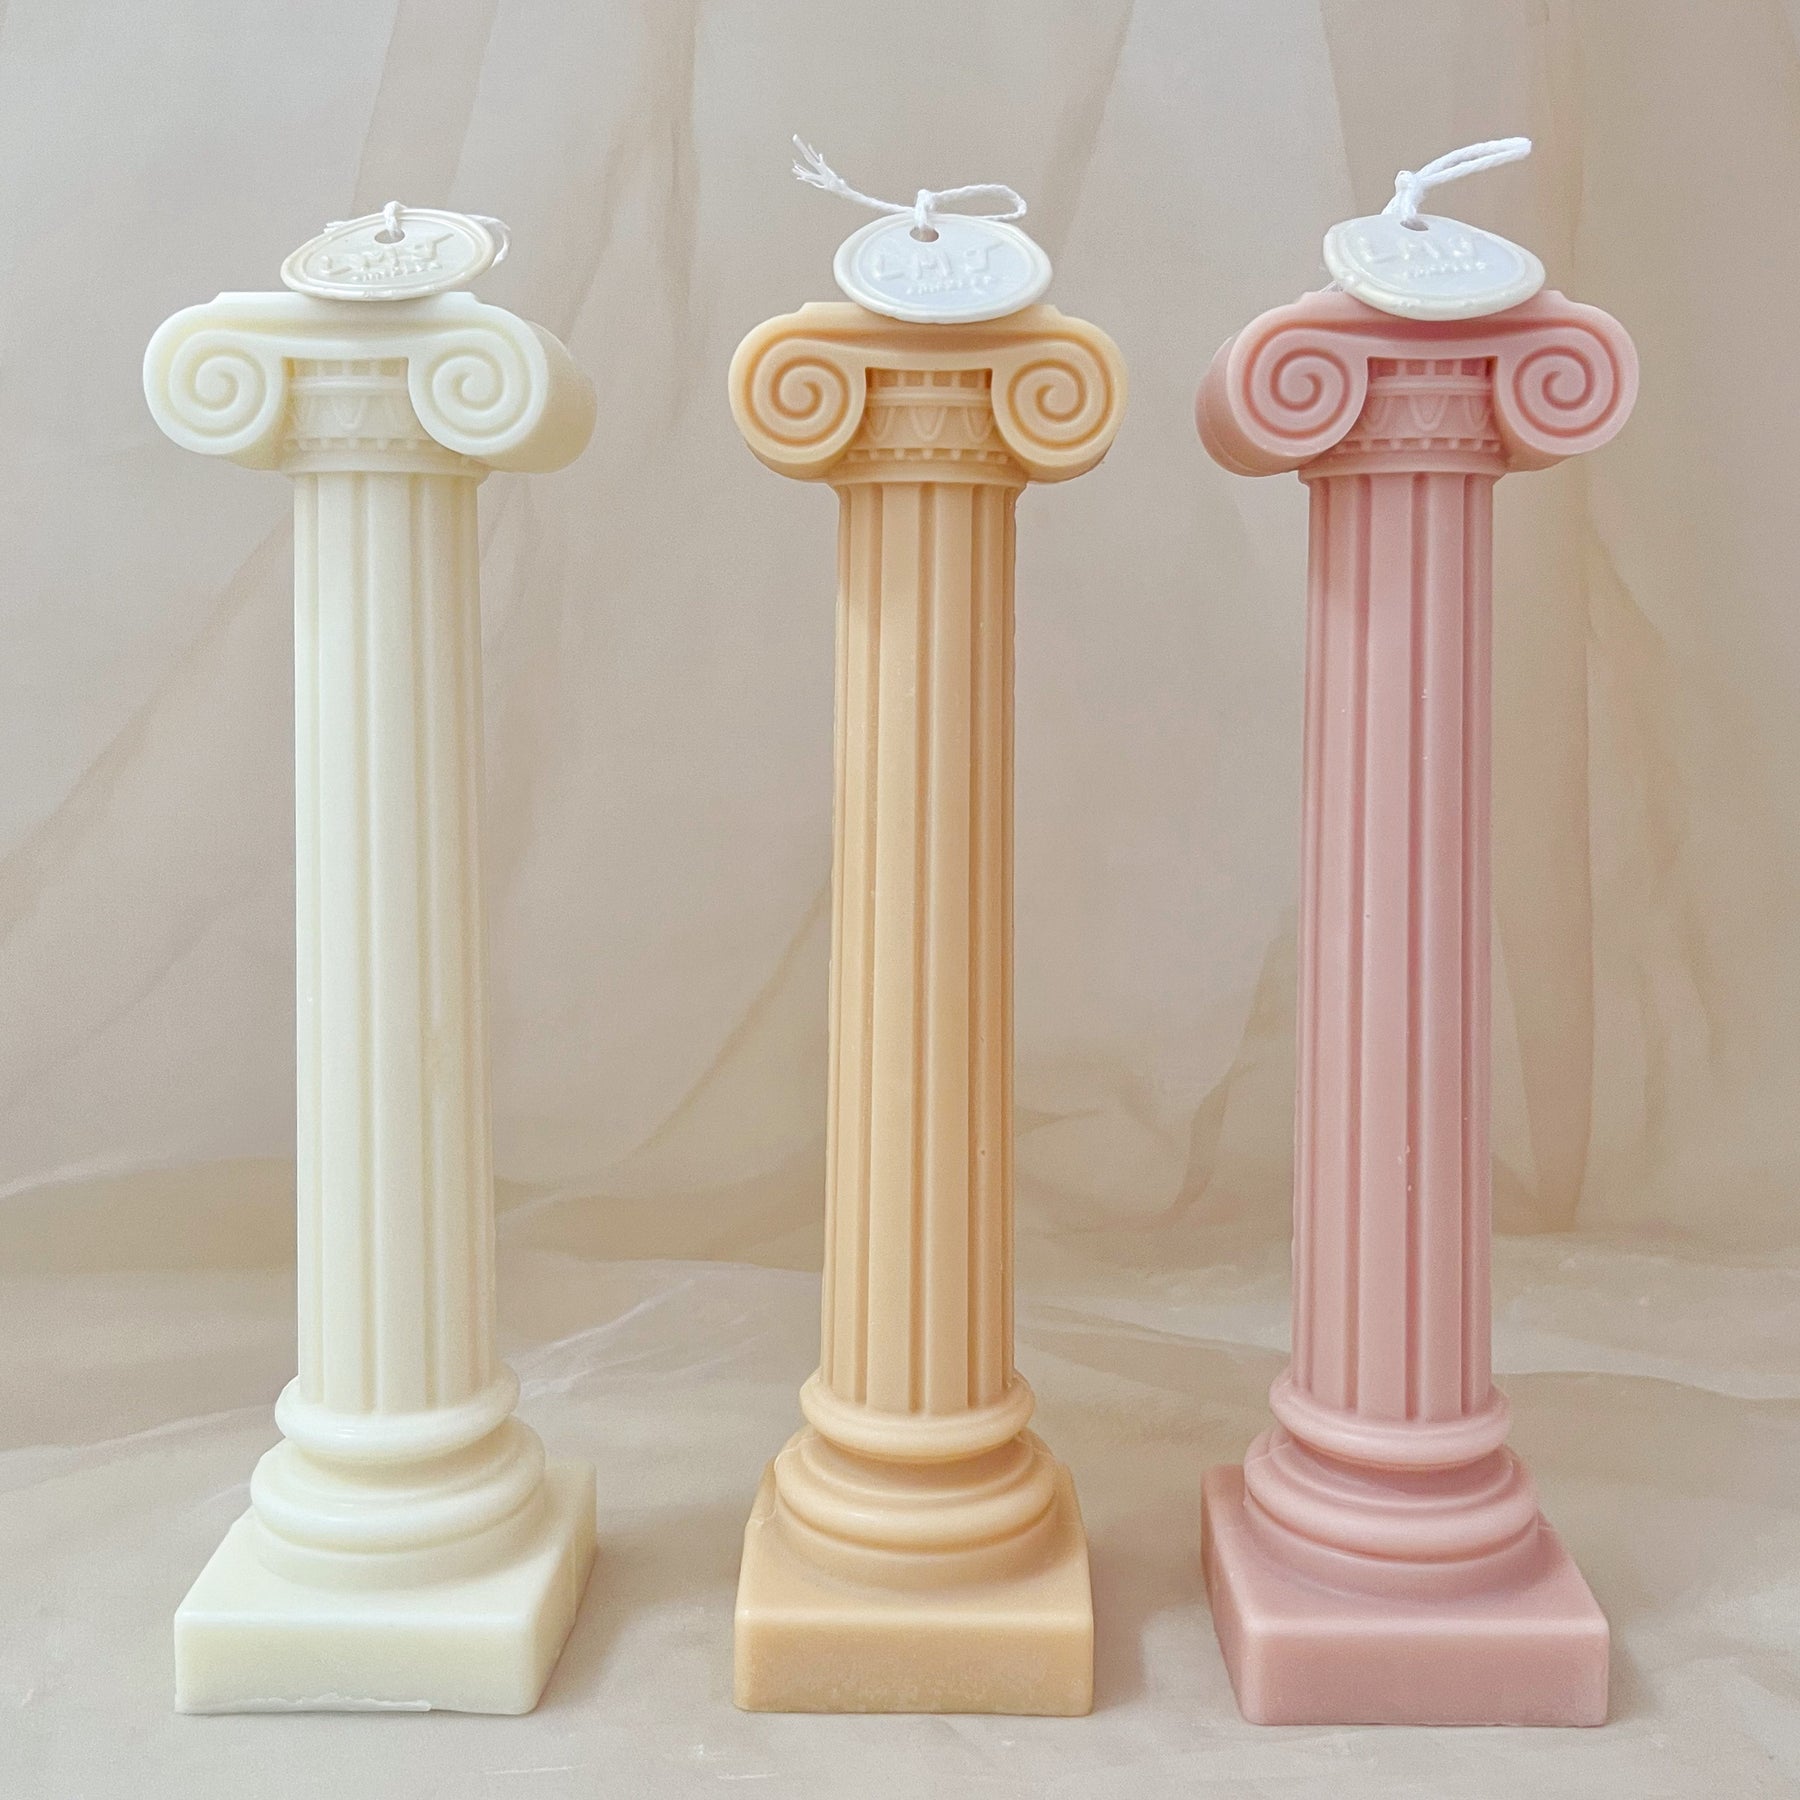 Ionic Column Scented Candle - Greek Sculptural Candle | LMJ Candles